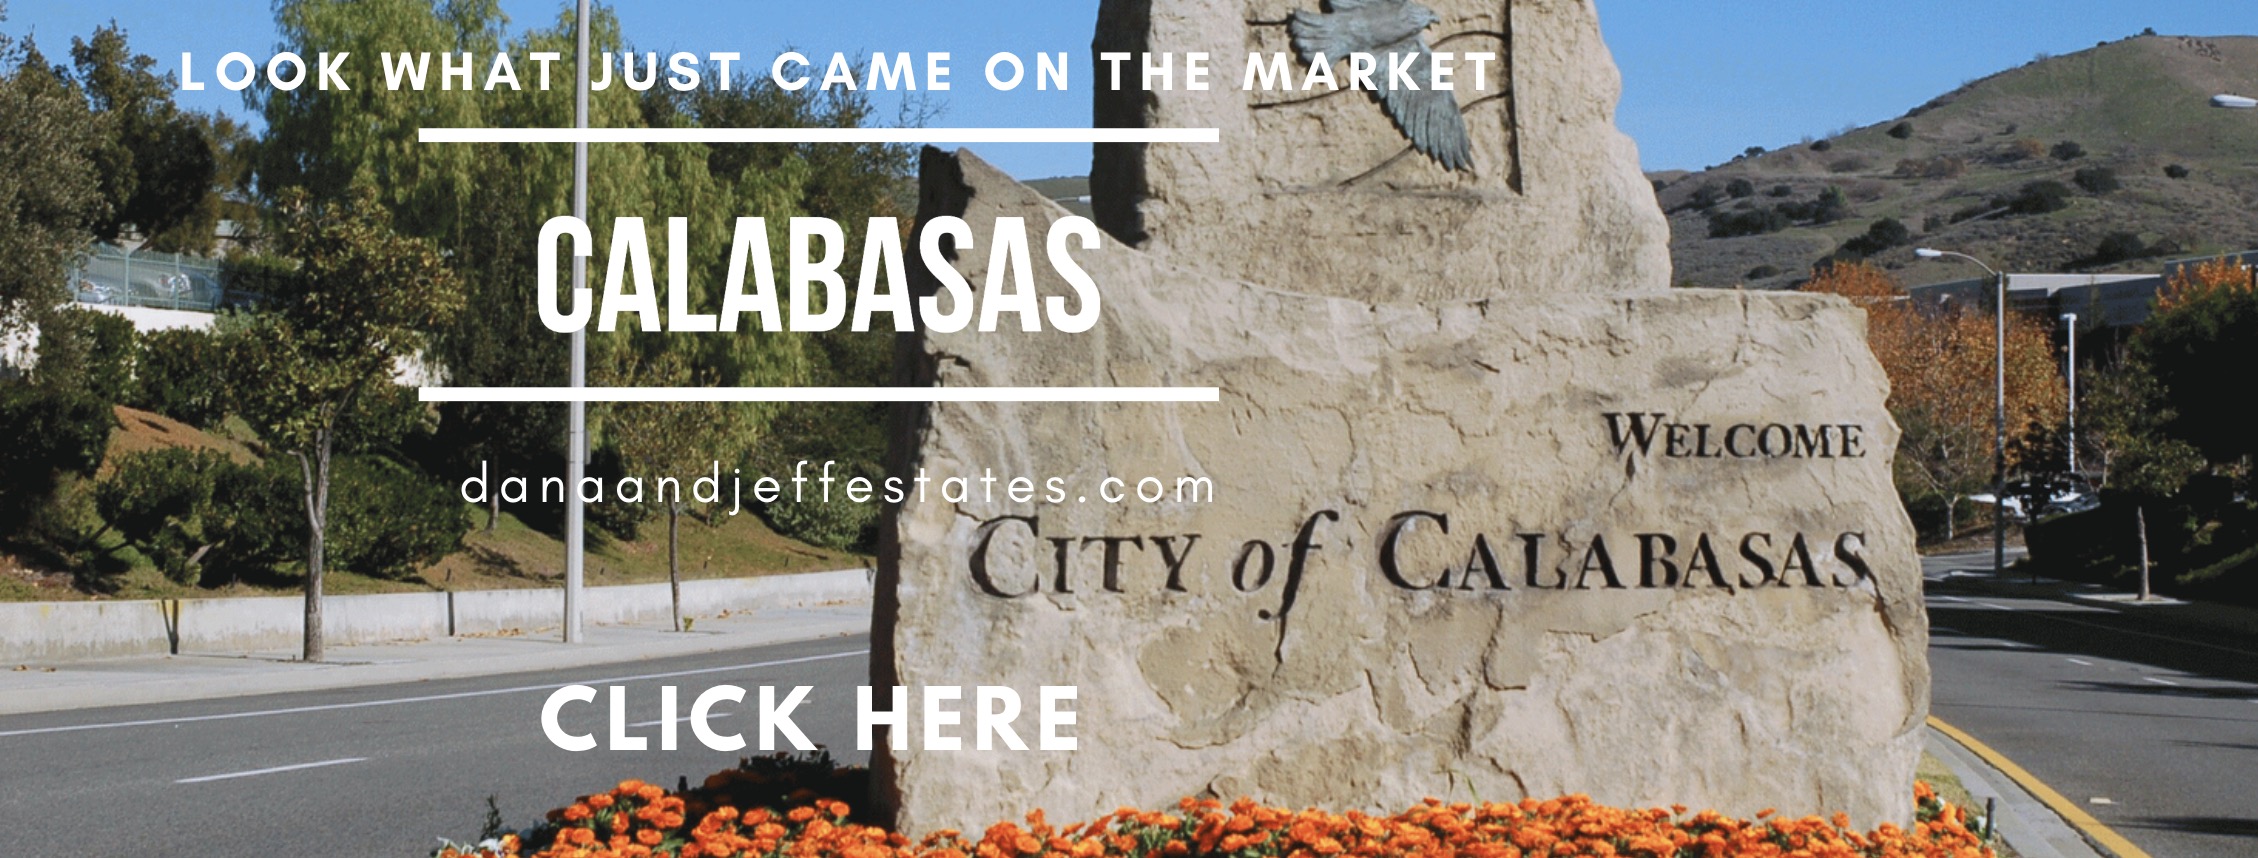 Calabasas Homes for Sale